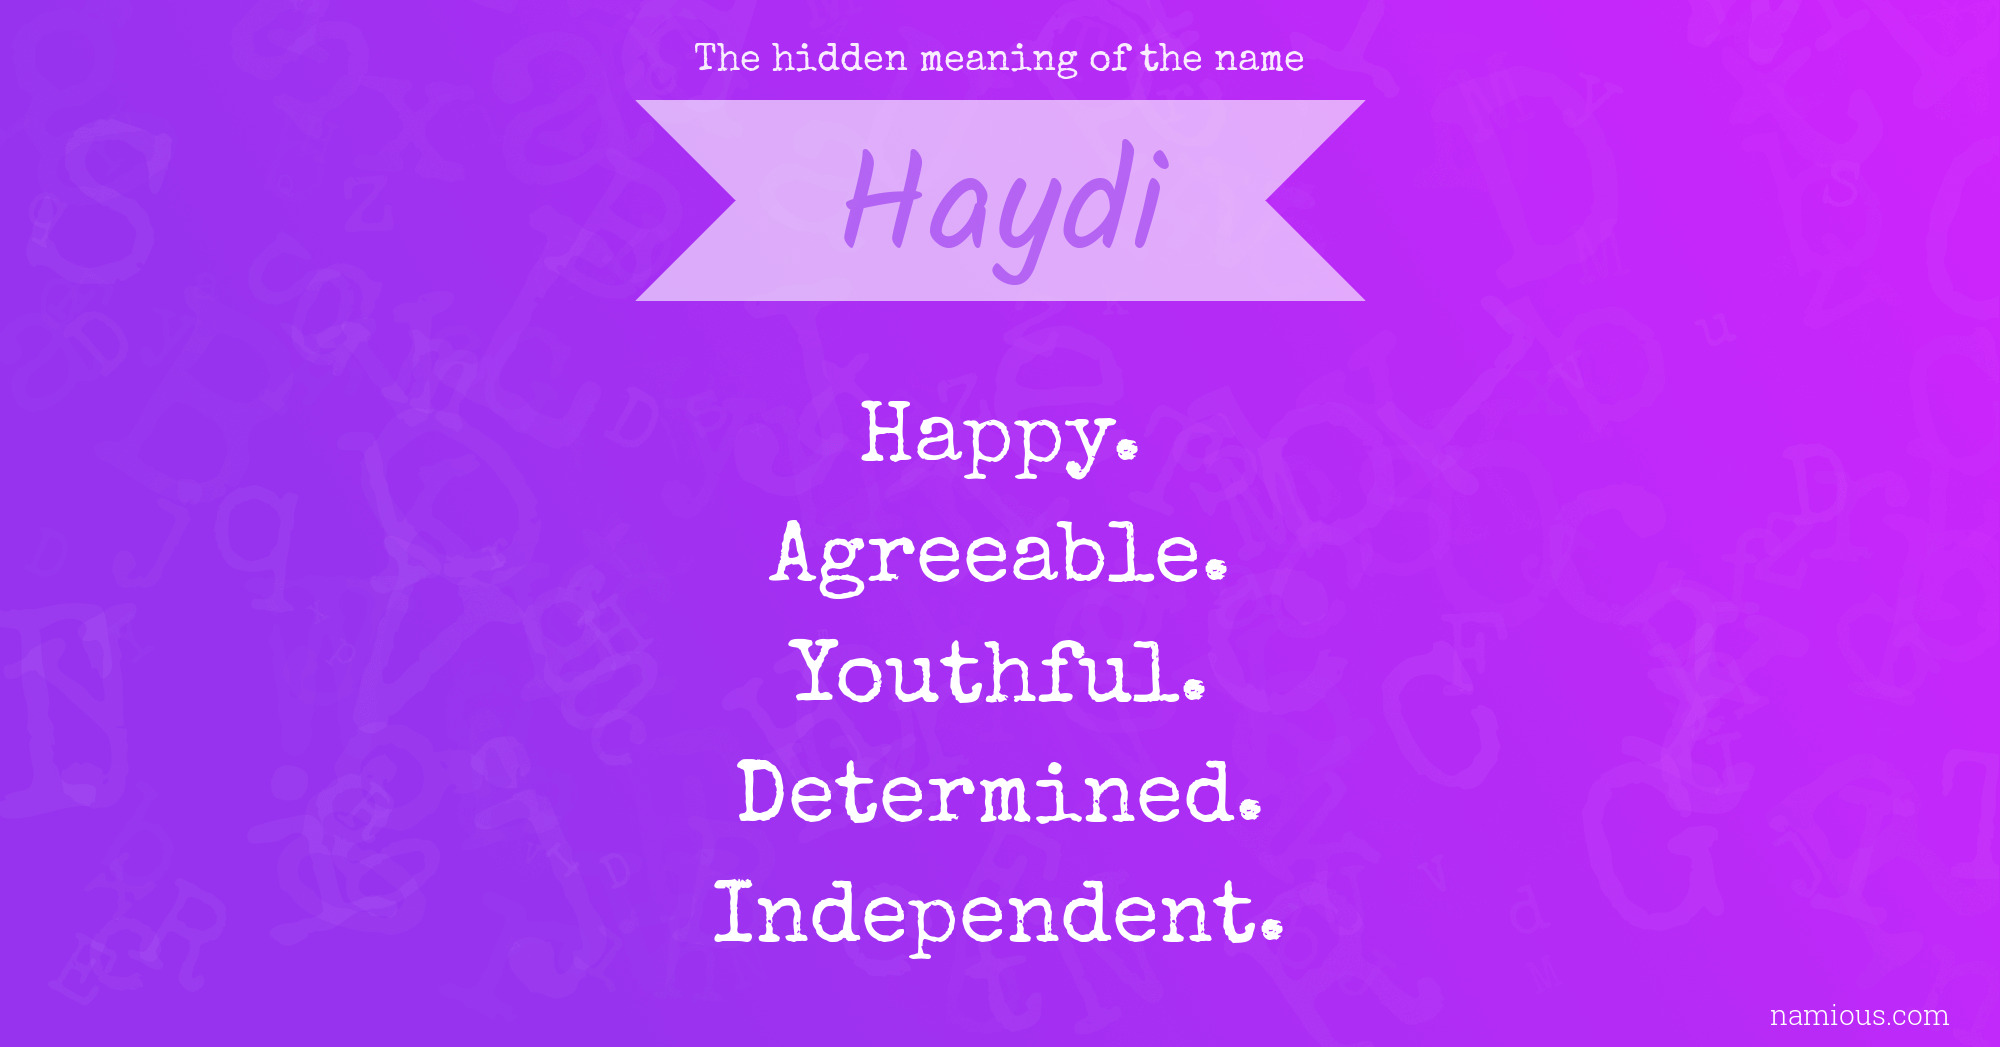 The hidden meaning of the name Haydi